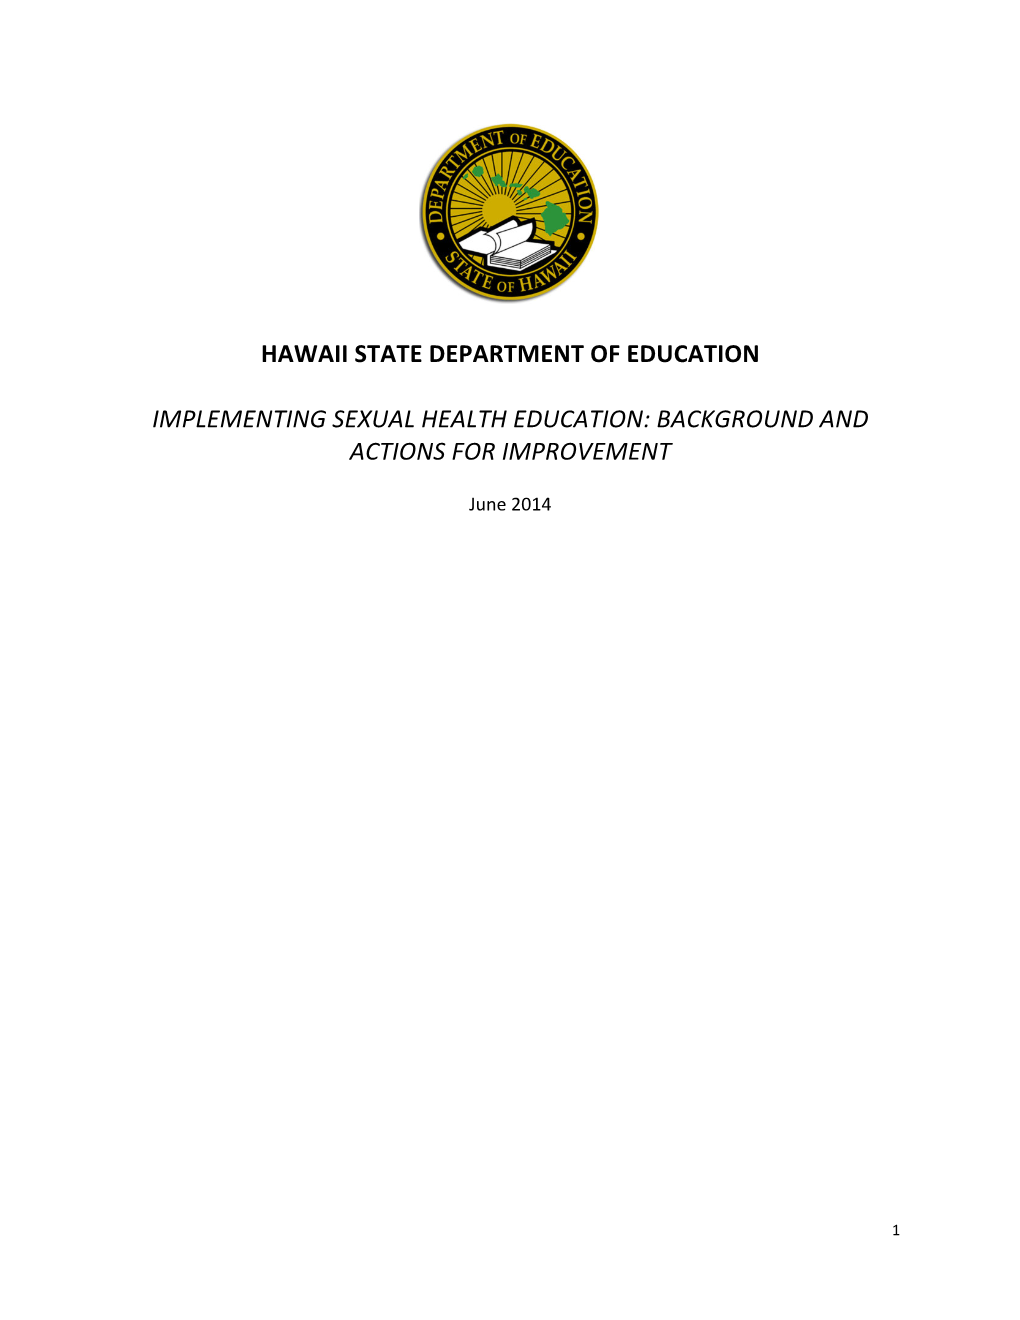 Hawaii State Department of Education Implementing Sexual Health Education